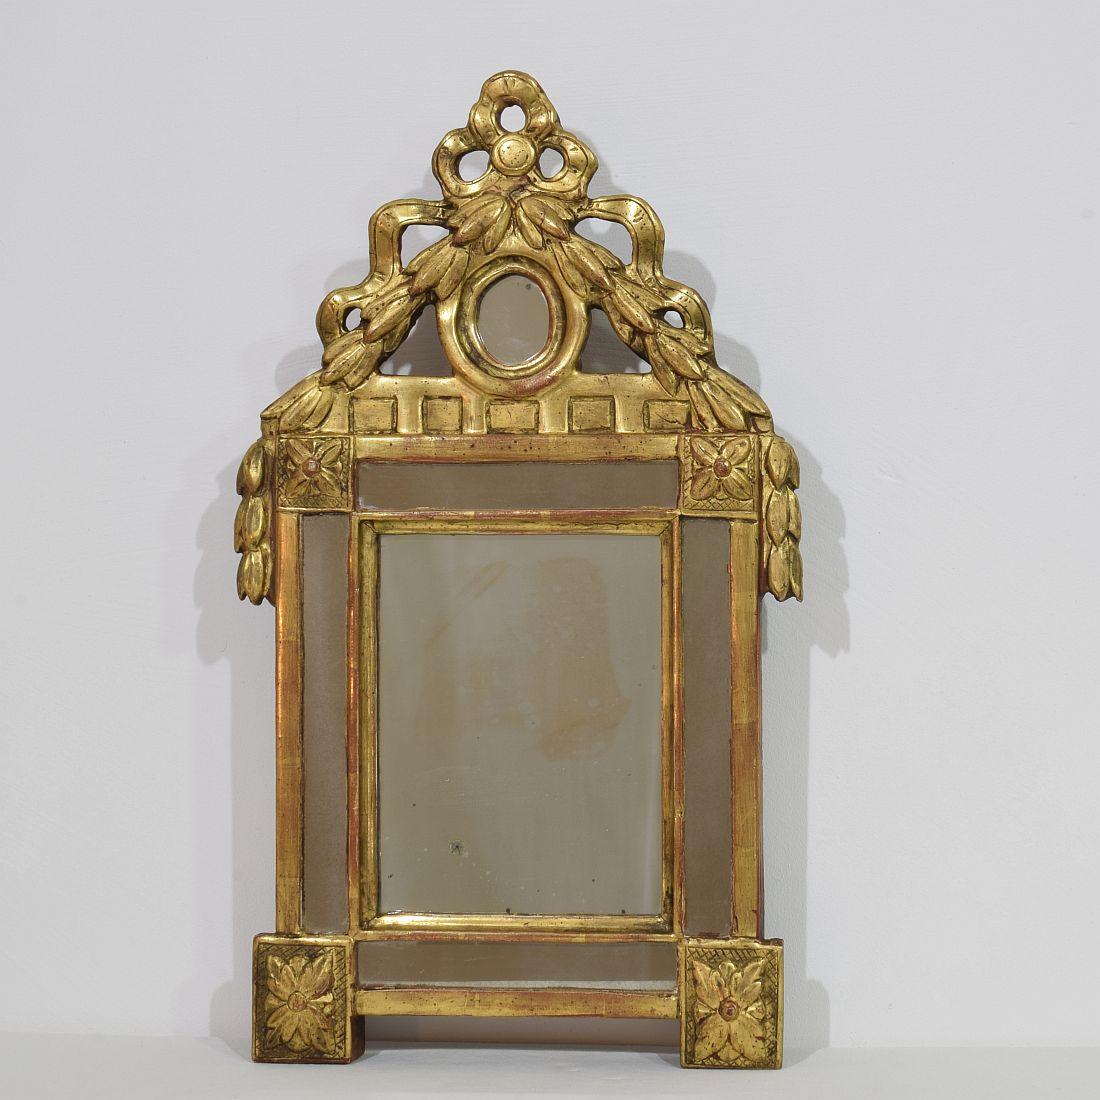 Small giltwood Louis XVI style mirror with its original mirror glass
France, circa 1760-1850
Weathered, small ,losses and old repairs.